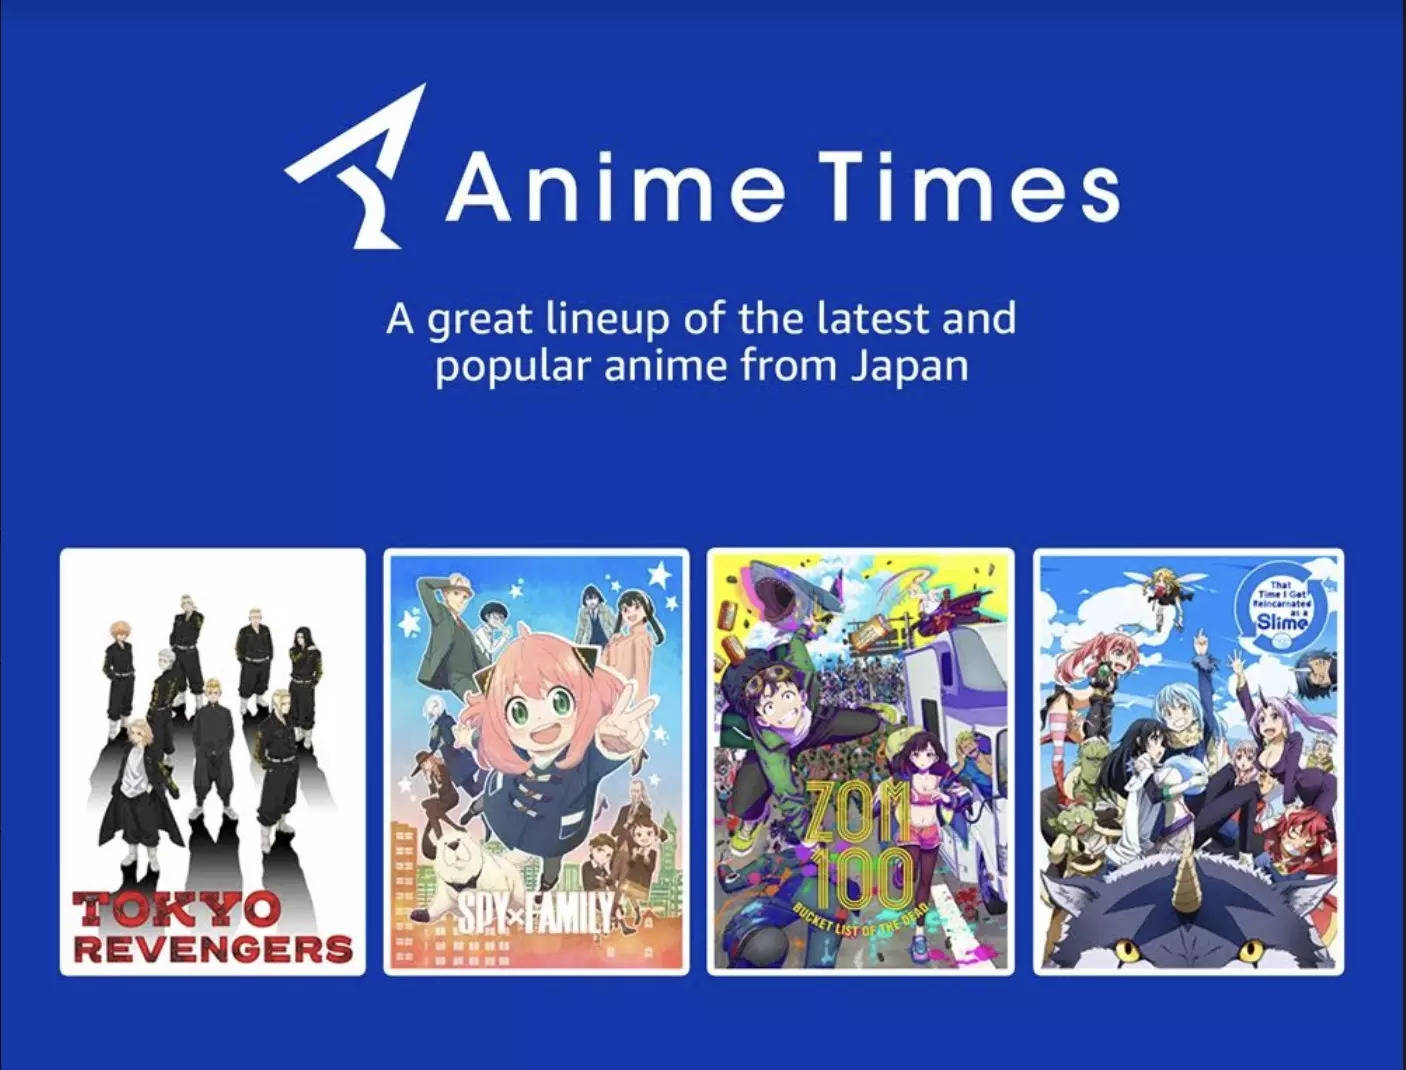 Anime Time - Anime Time added a new photo.